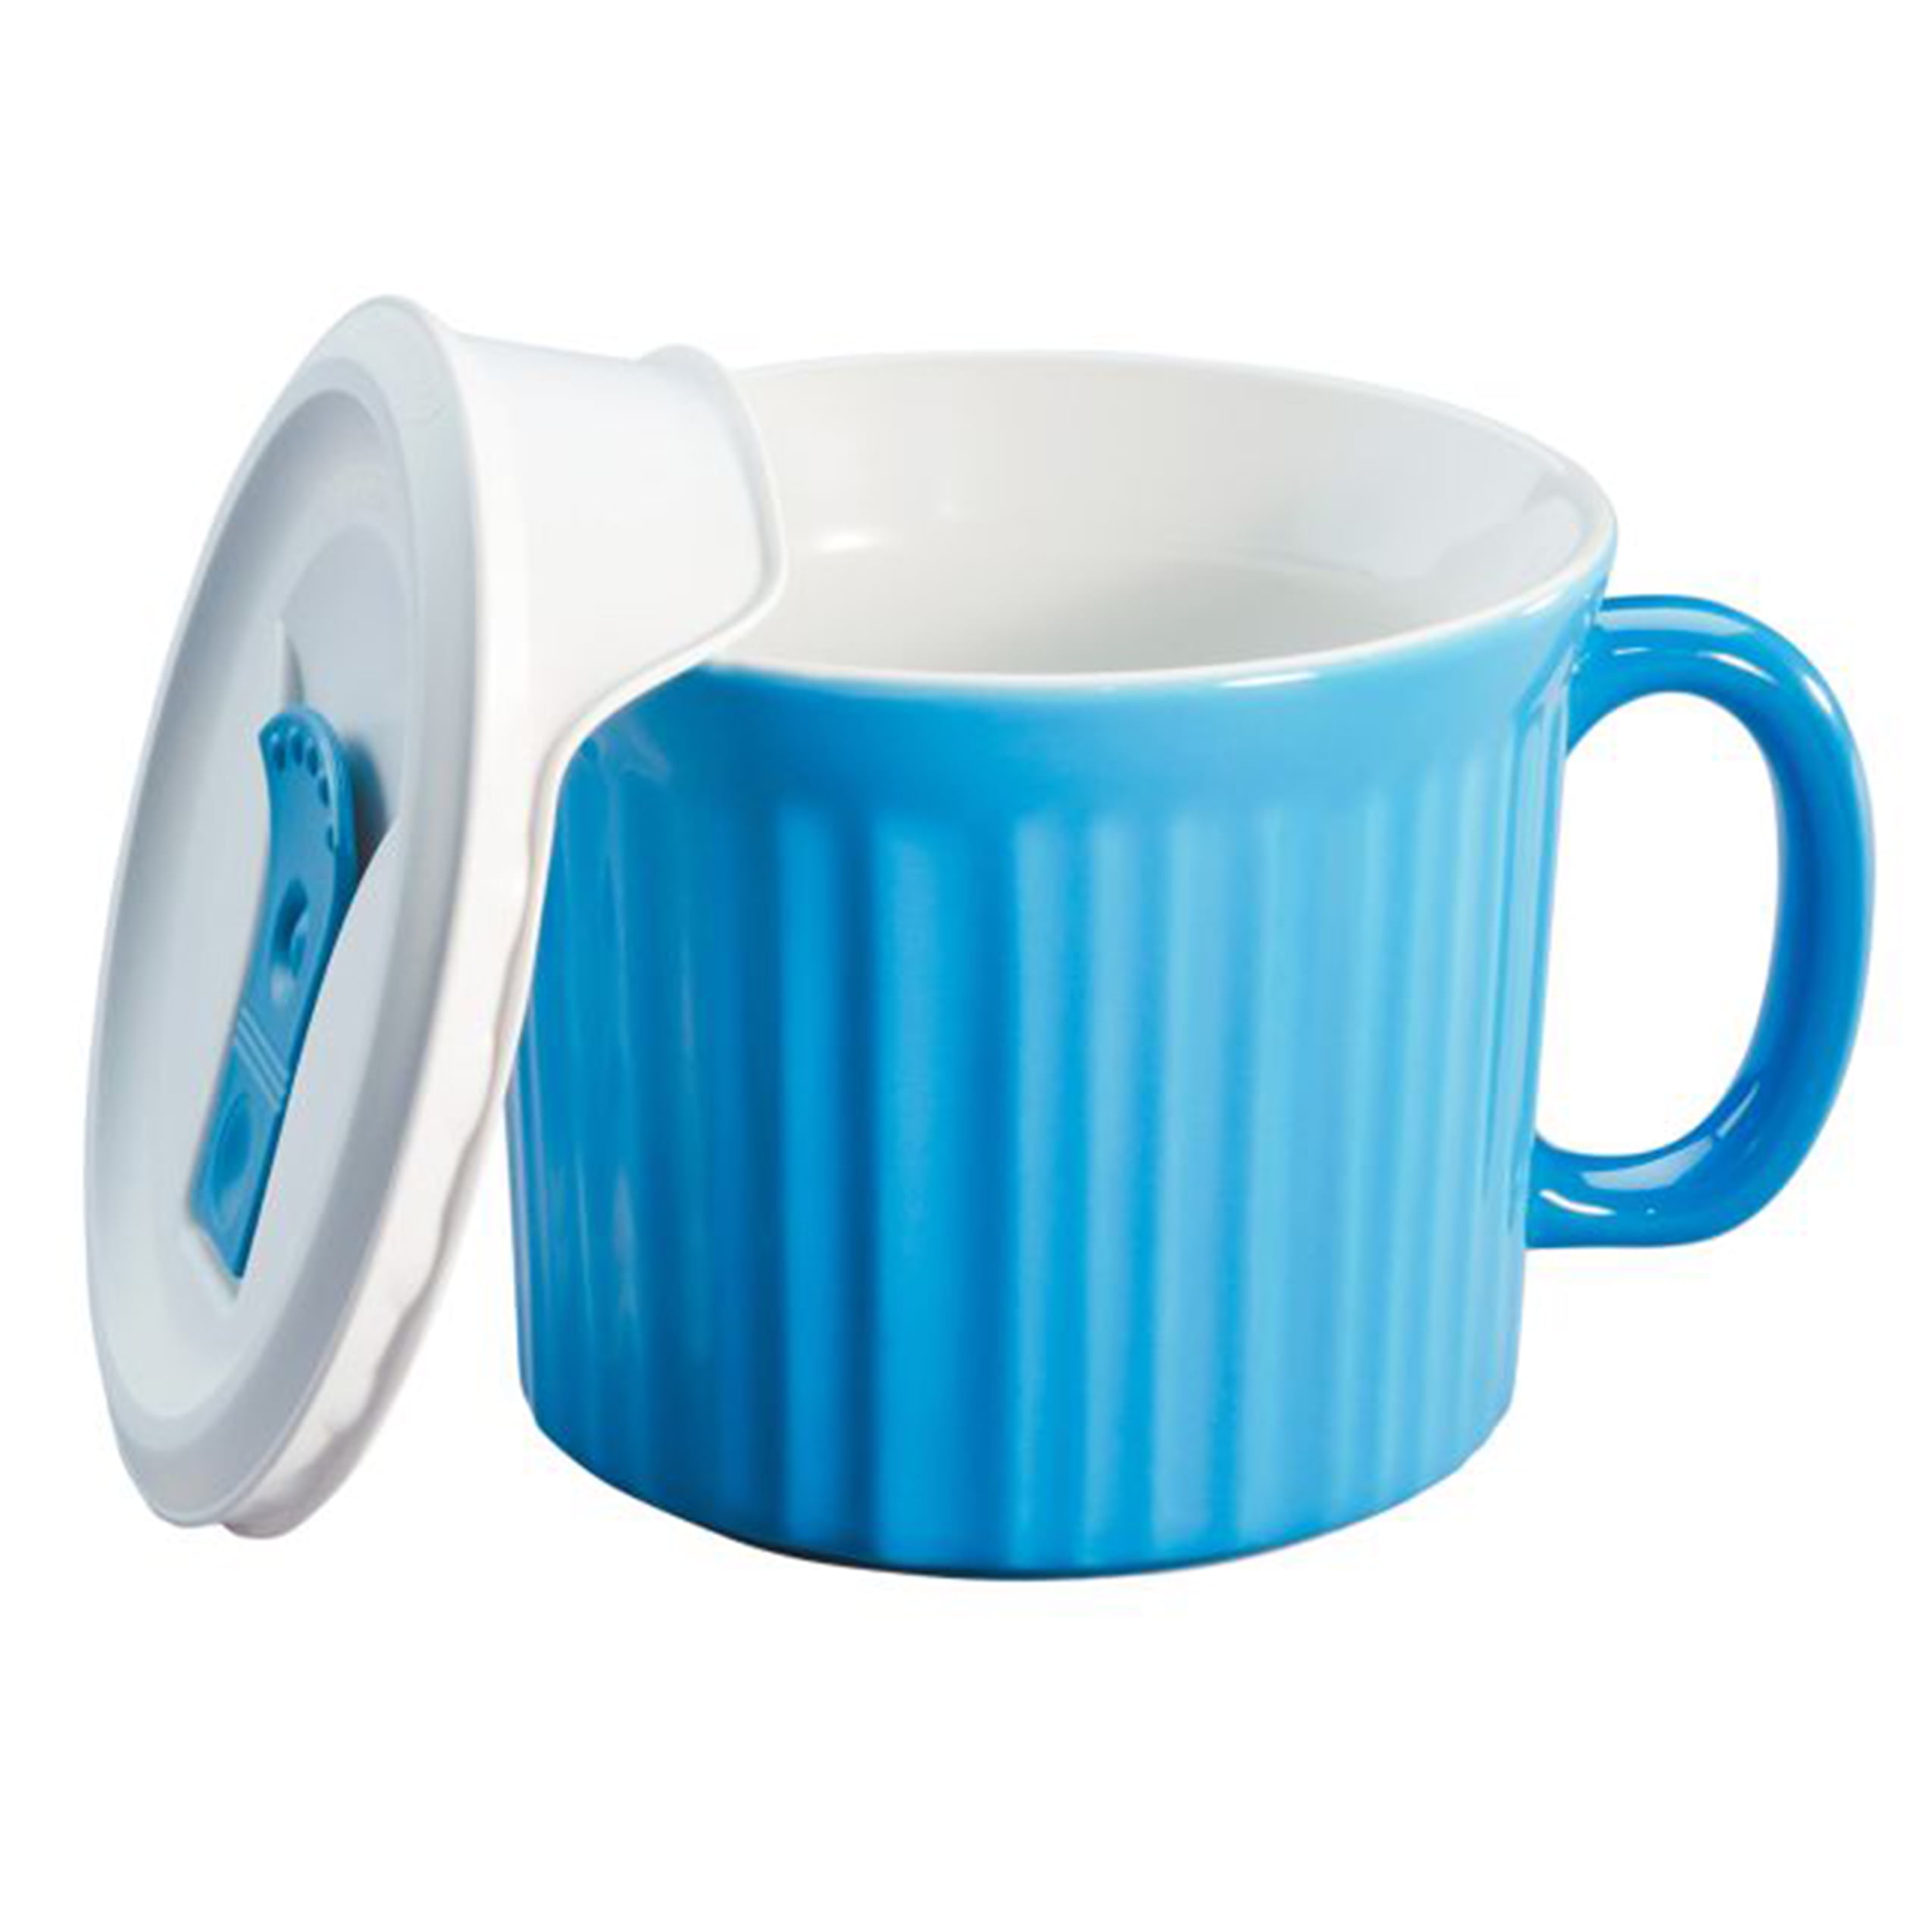 CorningWare French White 20 Ounce Oven-Safe Pop-In Mug with Vented 